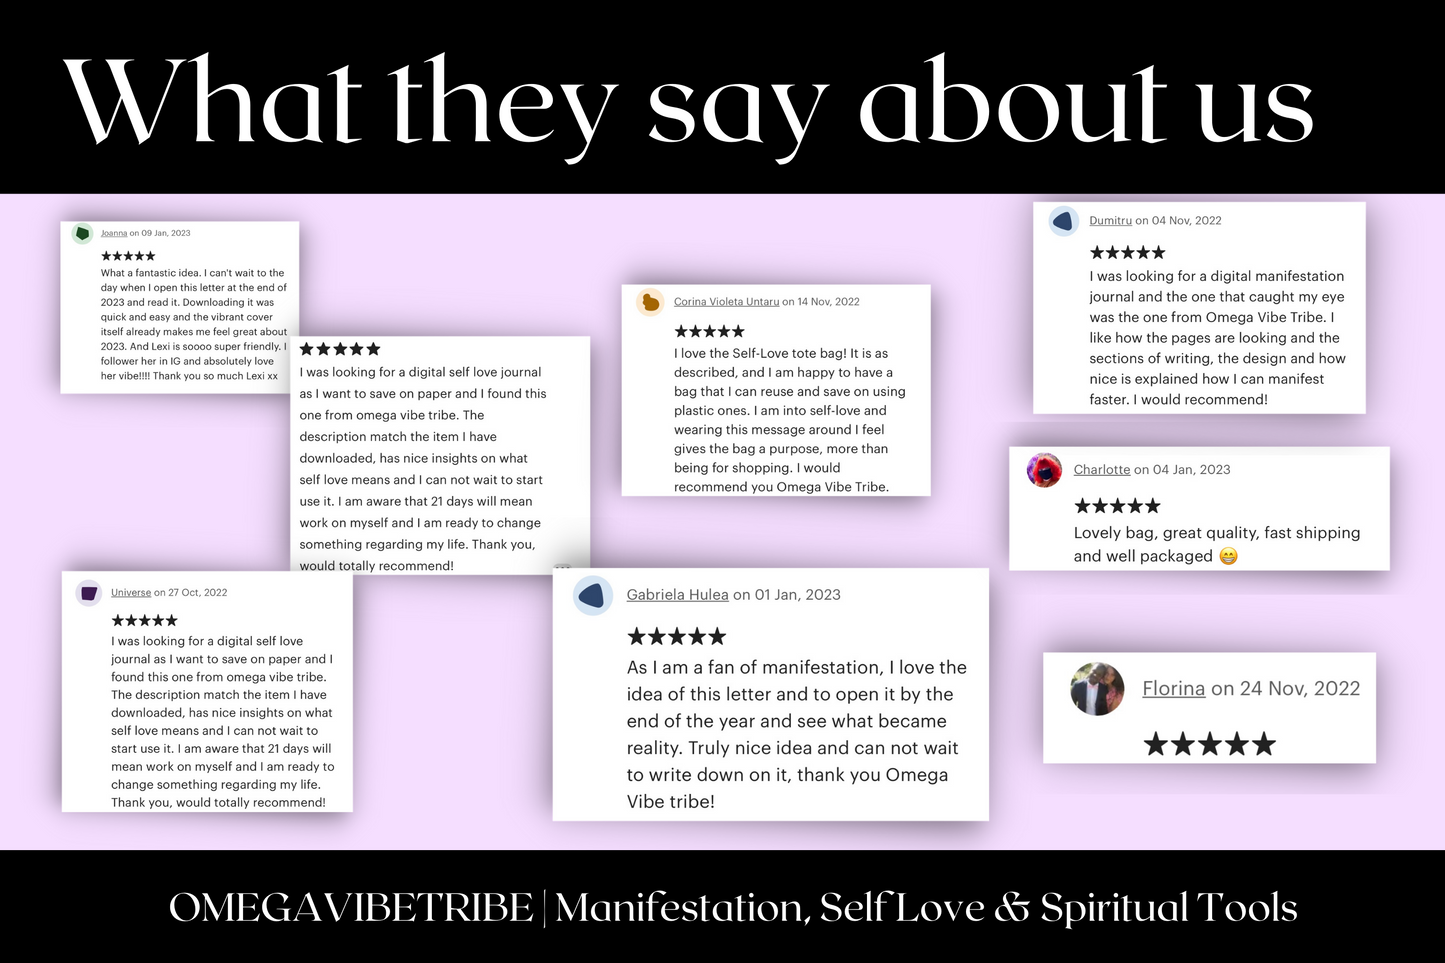 this page shows even more 5 stars reviews from the customers that love the Omega Vibe Tribe products